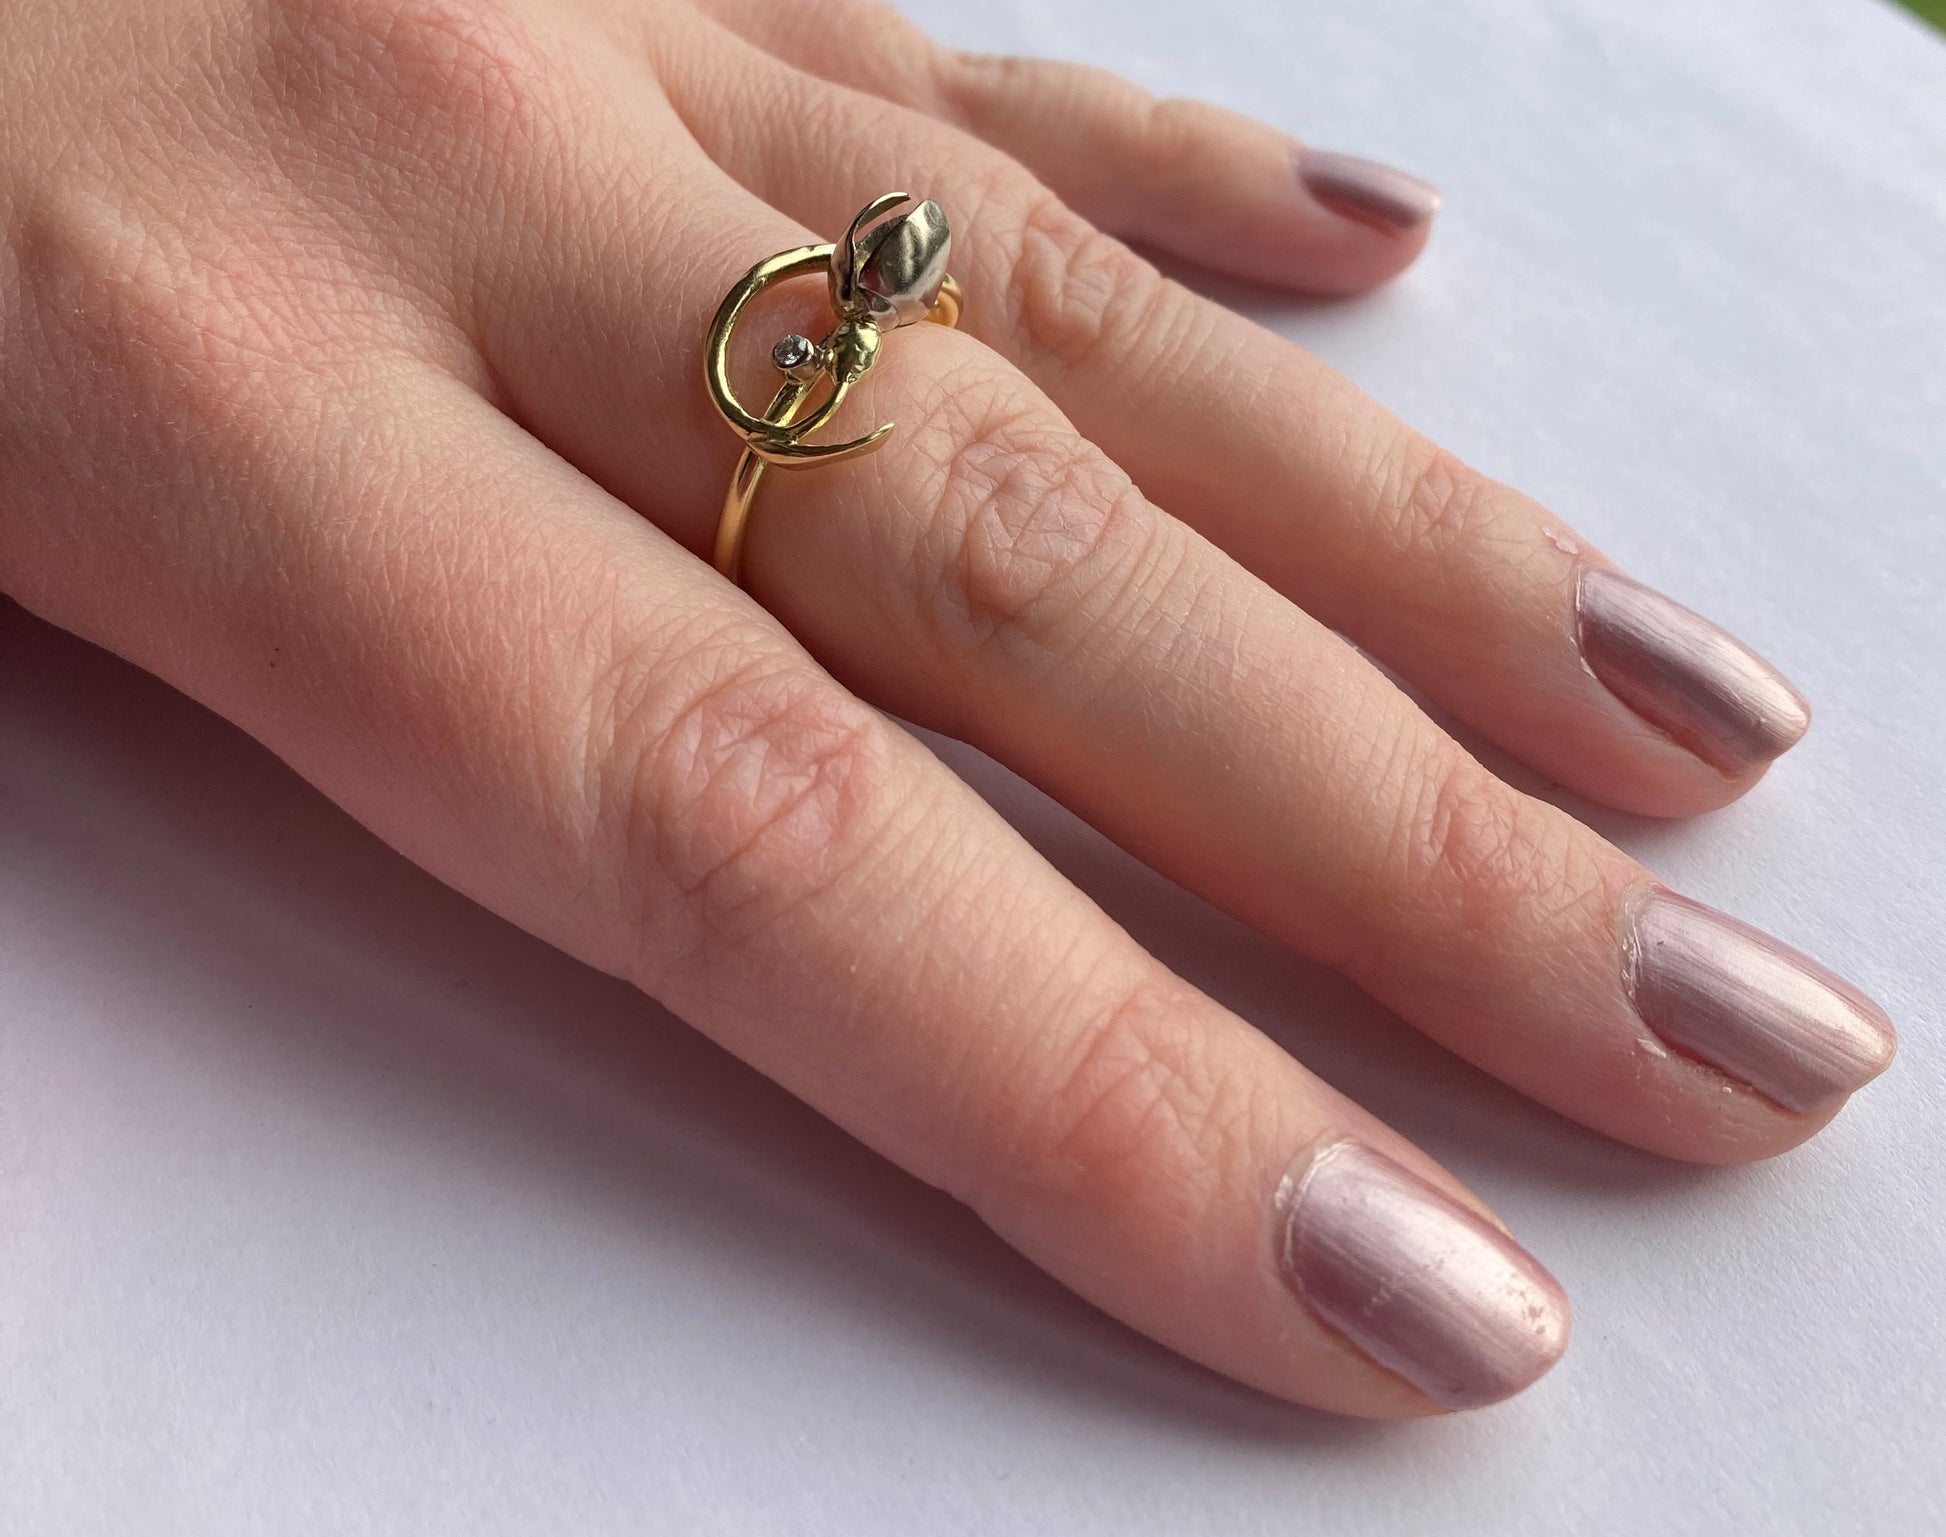 art nouveau style gold ring in shape of a snowdrop flower, on hand